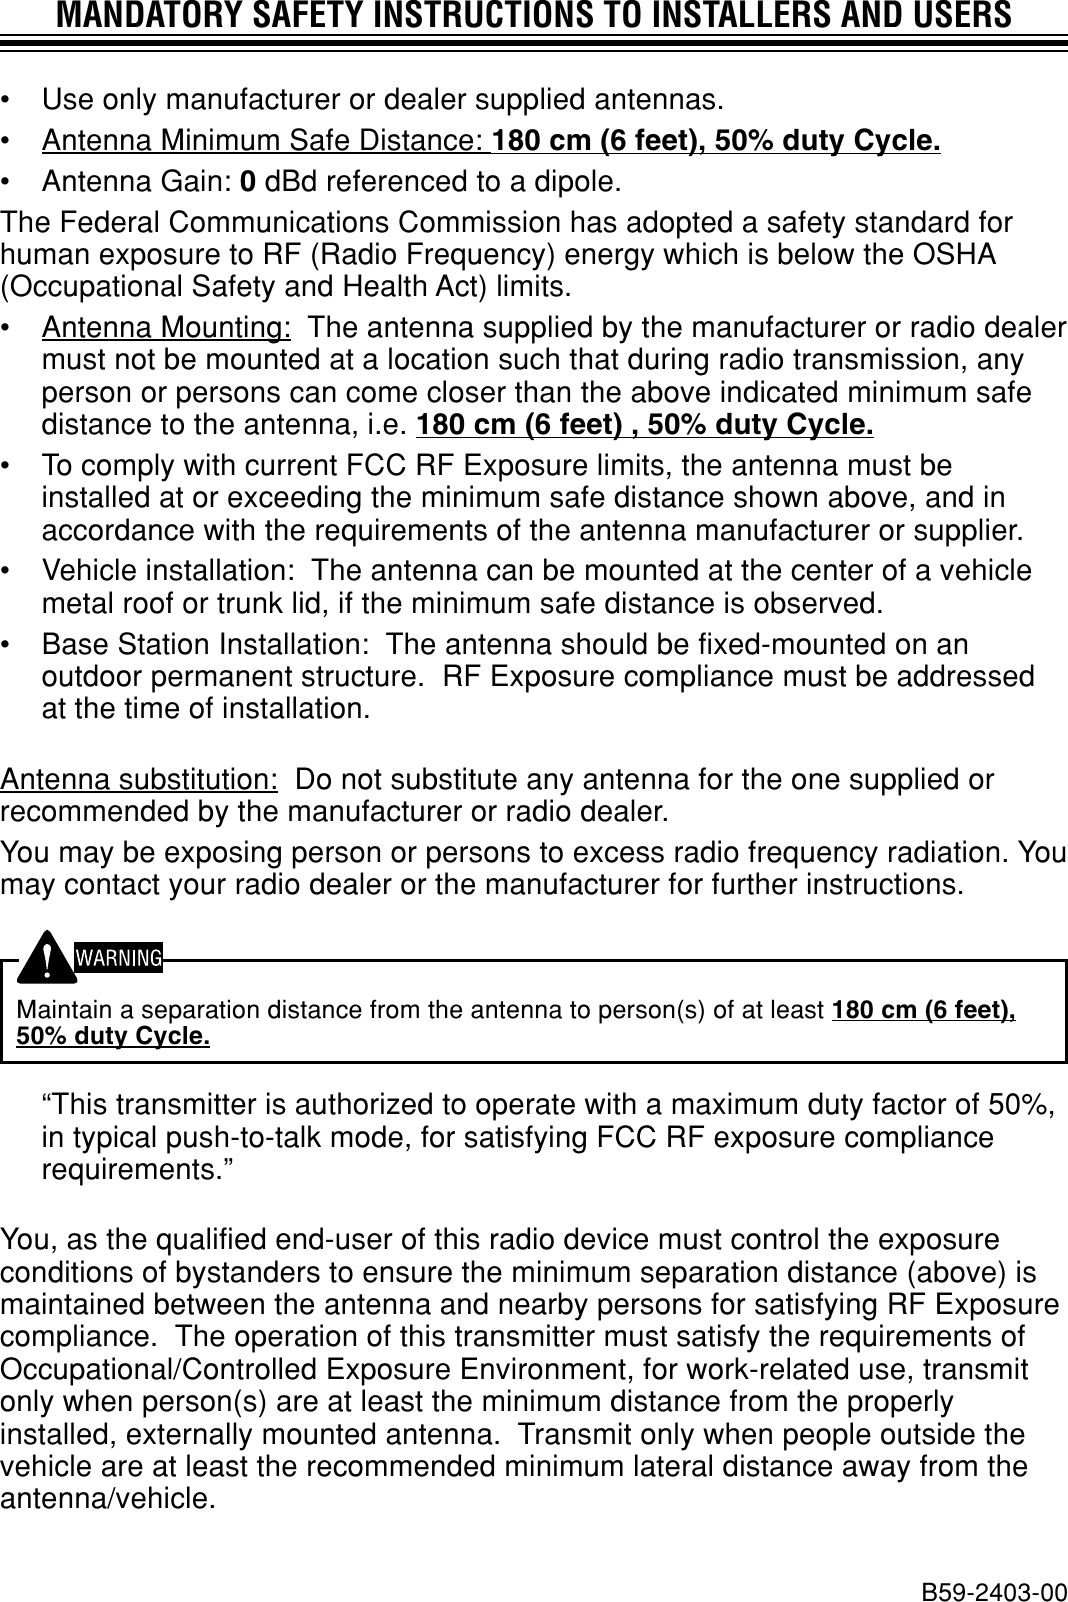 MANDATORY SAFETY INSTRUCTIONS TO INSTALLERS AND USERS• Use only manufacturer or dealer supplied antennas.•Antenna Minimum Safe Distance: 180 cm (6 feet), 50% duty Cycle.• Antenna Gain: 0dBd referenced to a dipole.The Federal Communications Commission has adopted a safety standard forhuman exposure to RF (Radio Frequency) energy which is below the OSHA(Occupational Safety and Health Act) limits.•Antenna Mounting:  The antenna supplied by the manufacturer or radio dealermust not be mounted at a location such that during radio transmission, anyperson or persons can come closer than the above indicated minimum safedistance to the antenna, i.e. 180 cm (6 feet) , 50% duty Cycle.• To comply with current FCC RF Exposure limits, the antenna must beinstalled at or exceeding the minimum safe distance shown above, and inaccordance with the requirements of the antenna manufacturer or supplier.• Vehicle installation:  The antenna can be mounted at the center of a vehiclemetal roof or trunk lid, if the minimum safe distance is observed.• Base Station Installation:  The antenna should be fixed-mounted on anoutdoor permanent structure.  RF Exposure compliance must be addressedat the time of installation.Antenna substitution:  Do not substitute any antenna for the one supplied orrecommended by the manufacturer or radio dealer.You may be exposing person or persons to excess radio frequency radiation. Youmay contact your radio dealer or the manufacturer for further instructions.Maintain a separation distance from the antenna to person(s) of at least 180 cm (6 feet),50% duty Cycle.“This transmitter is authorized to operate with a maximum duty factor of 50%,in typical push-to-talk mode, for satisfying FCC RF exposure compliancerequirements.”You, as the qualified end-user of this radio device must control the exposureconditions of bystanders to ensure the minimum separation distance (above) ismaintained between the antenna and nearby persons for satisfying RF Exposurecompliance.  The operation of this transmitter must satisfy the requirements ofOccupational/Controlled Exposure Environment, for work-related use, transmitonly when person(s) are at least the minimum distance from the properlyinstalled, externally mounted antenna.  Transmit only when people outside thevehicle are at least the recommended minimum lateral distance away from theantenna/vehicle.B59-2403-00